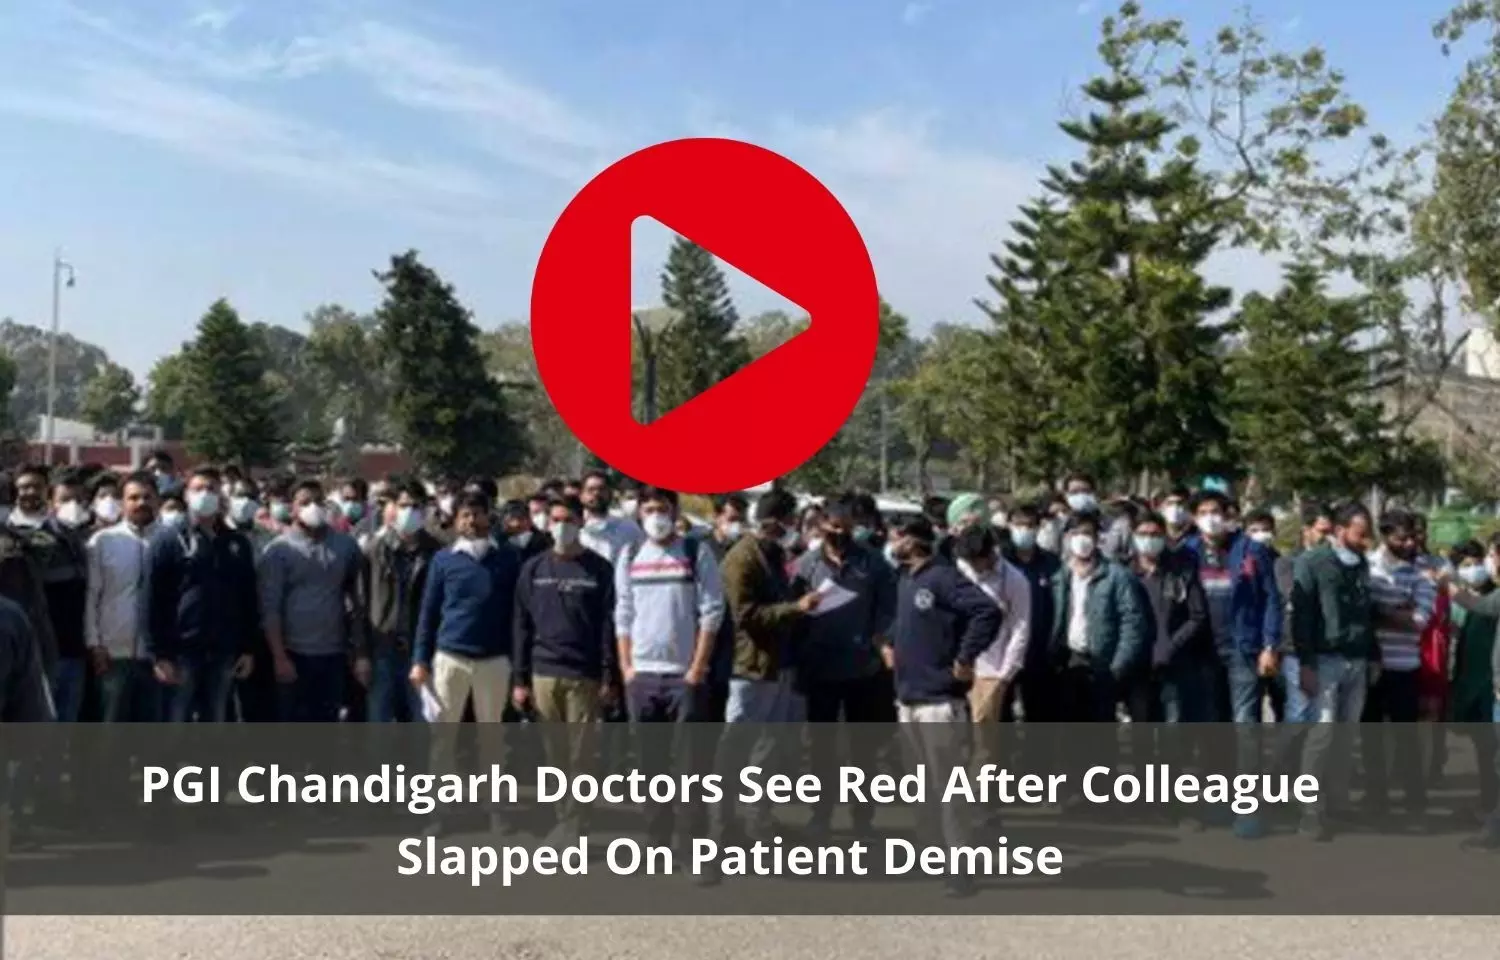 PGI Chandigarh doctors see red after colleague slapped on patient demise